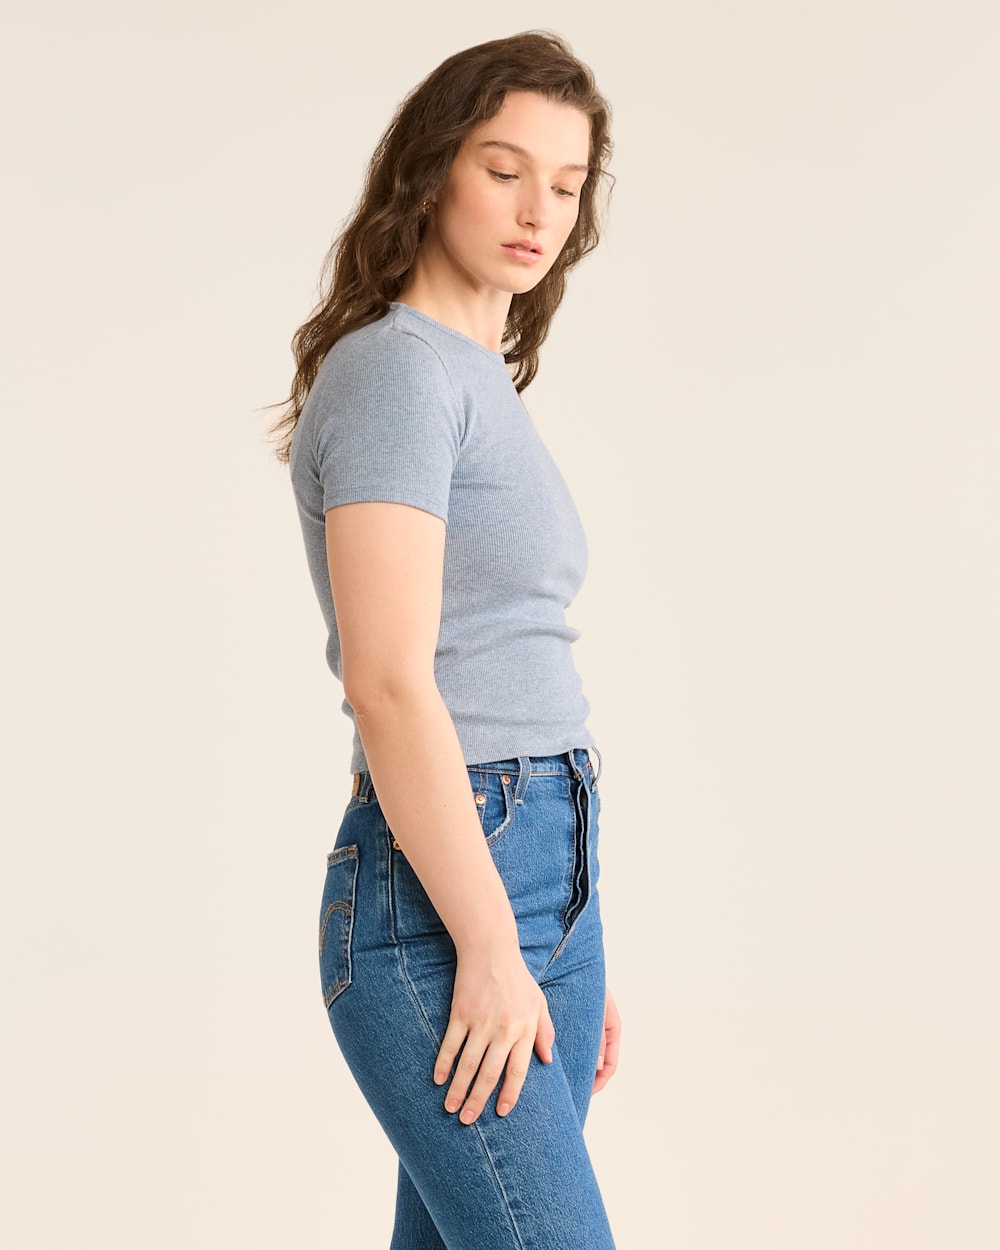 ALTERNATE VIEW OF WOMEN'S PIMA COTTON BABY TEE IN LIGHT BLUE HEATHER image number 2